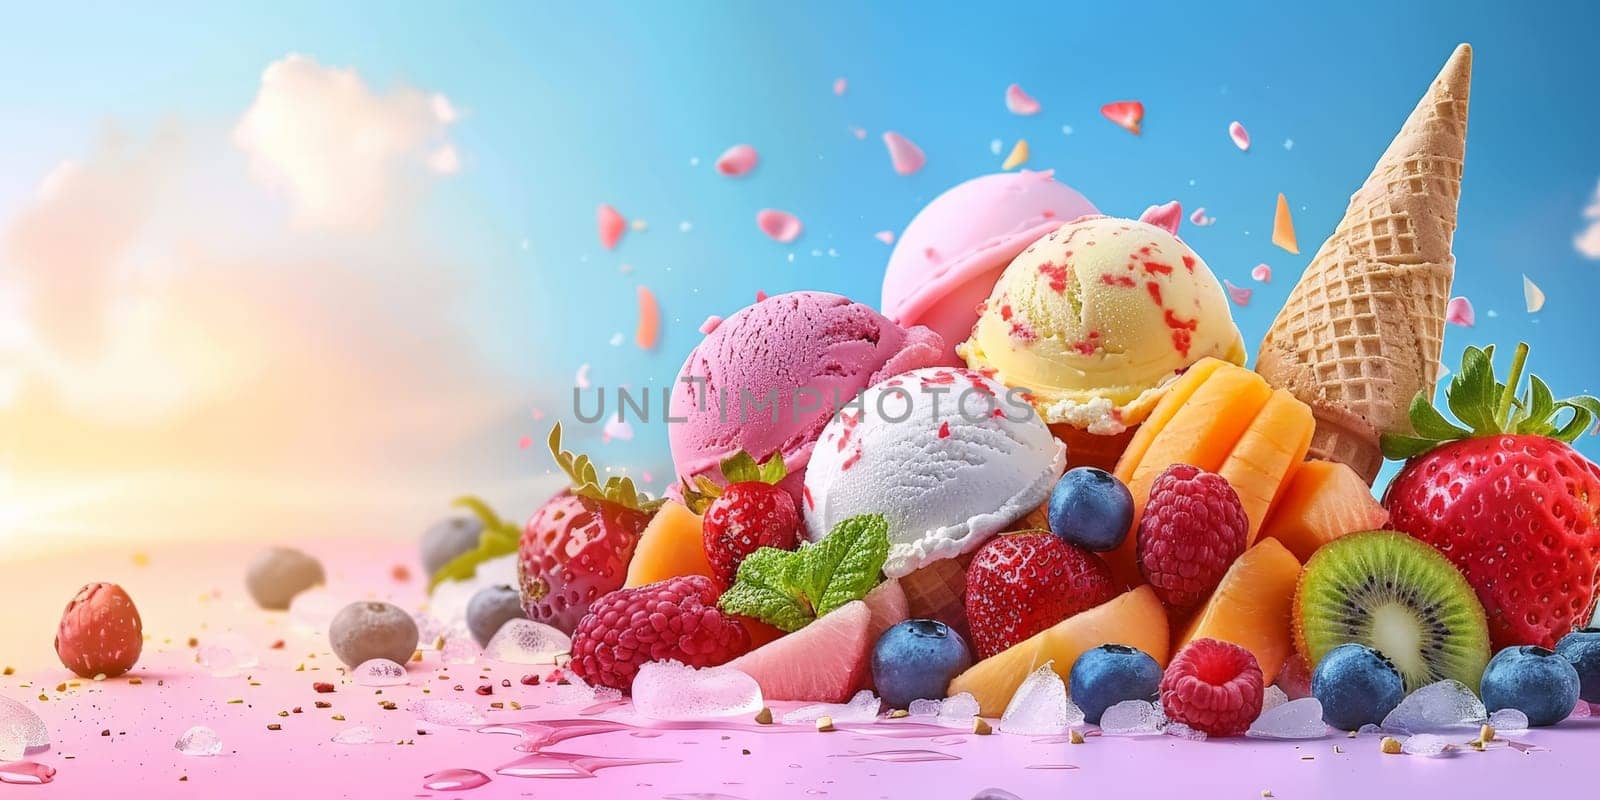 A colorful assortment of ice cream and fruit, including strawberries, blueberries, and kiwi